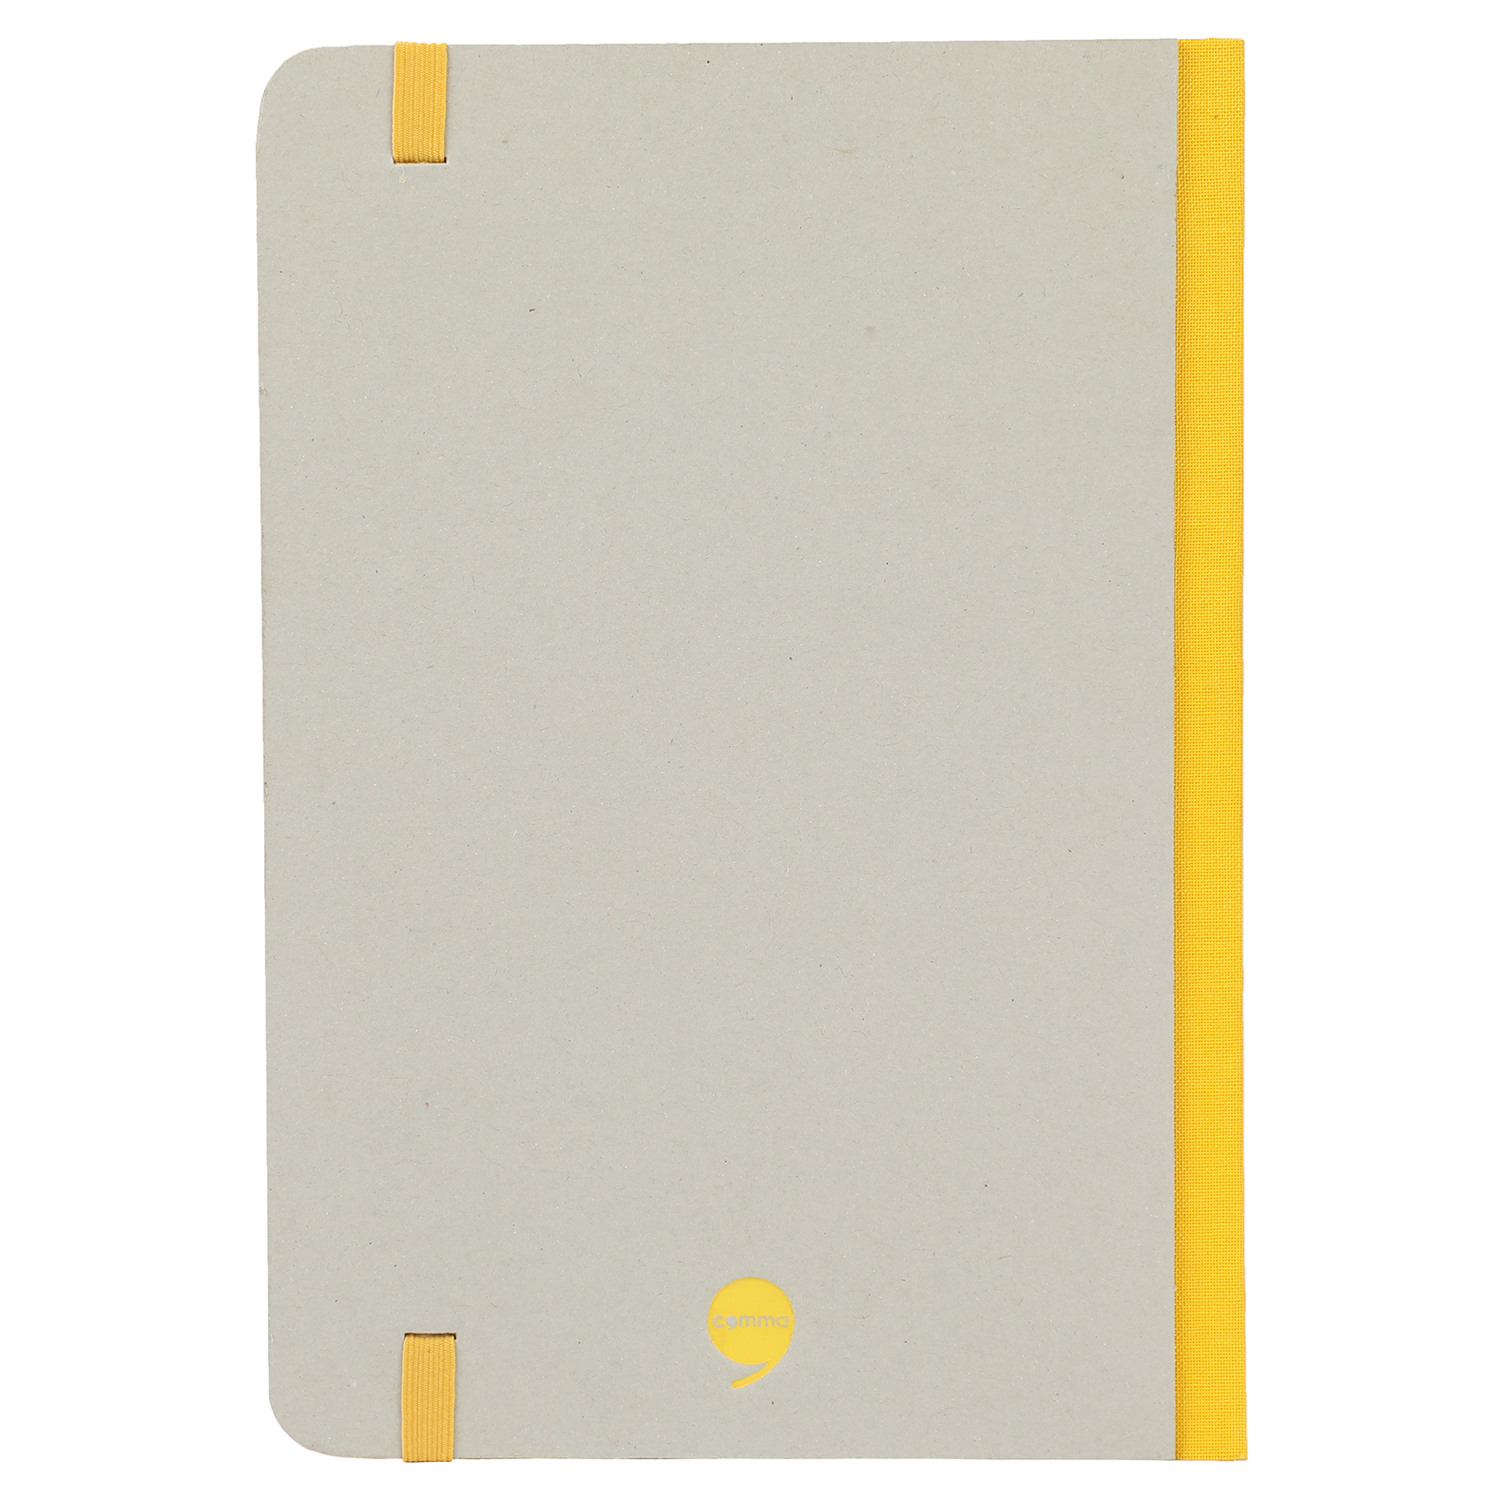 Comma Ecologique  A5 Size  Hard Bound Notebook (Yellow)